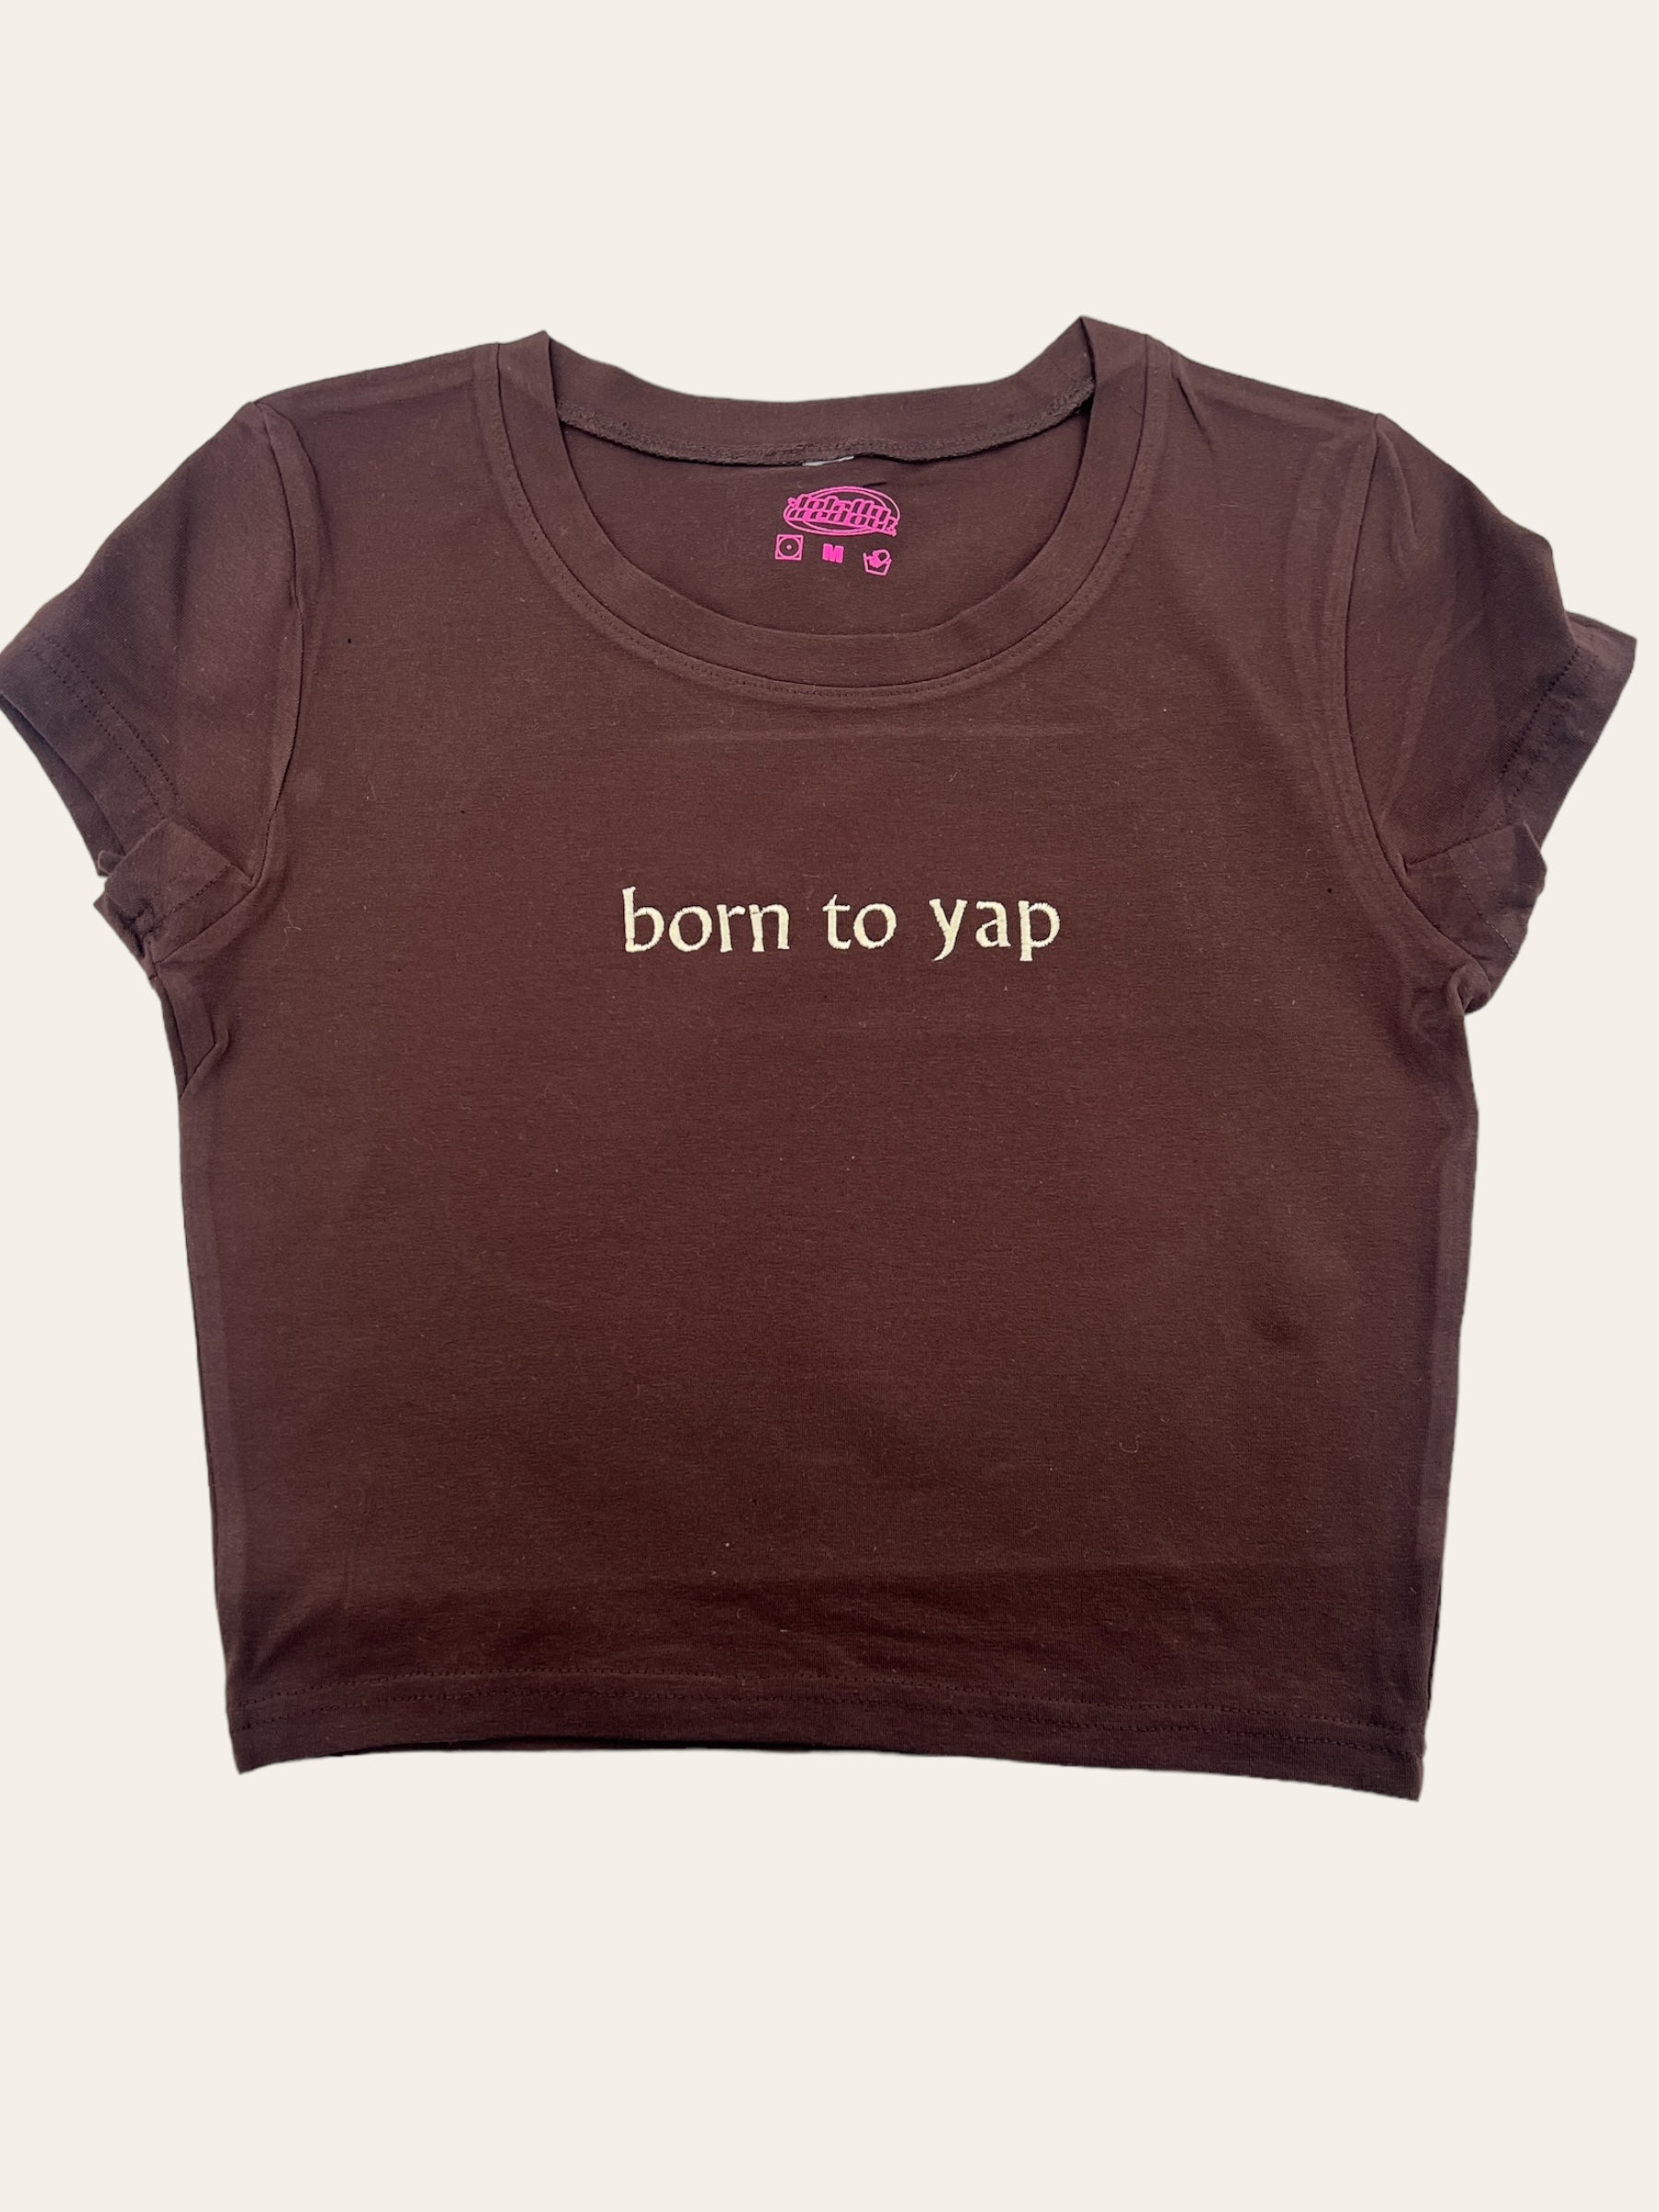 a brown shirt that says born to yap